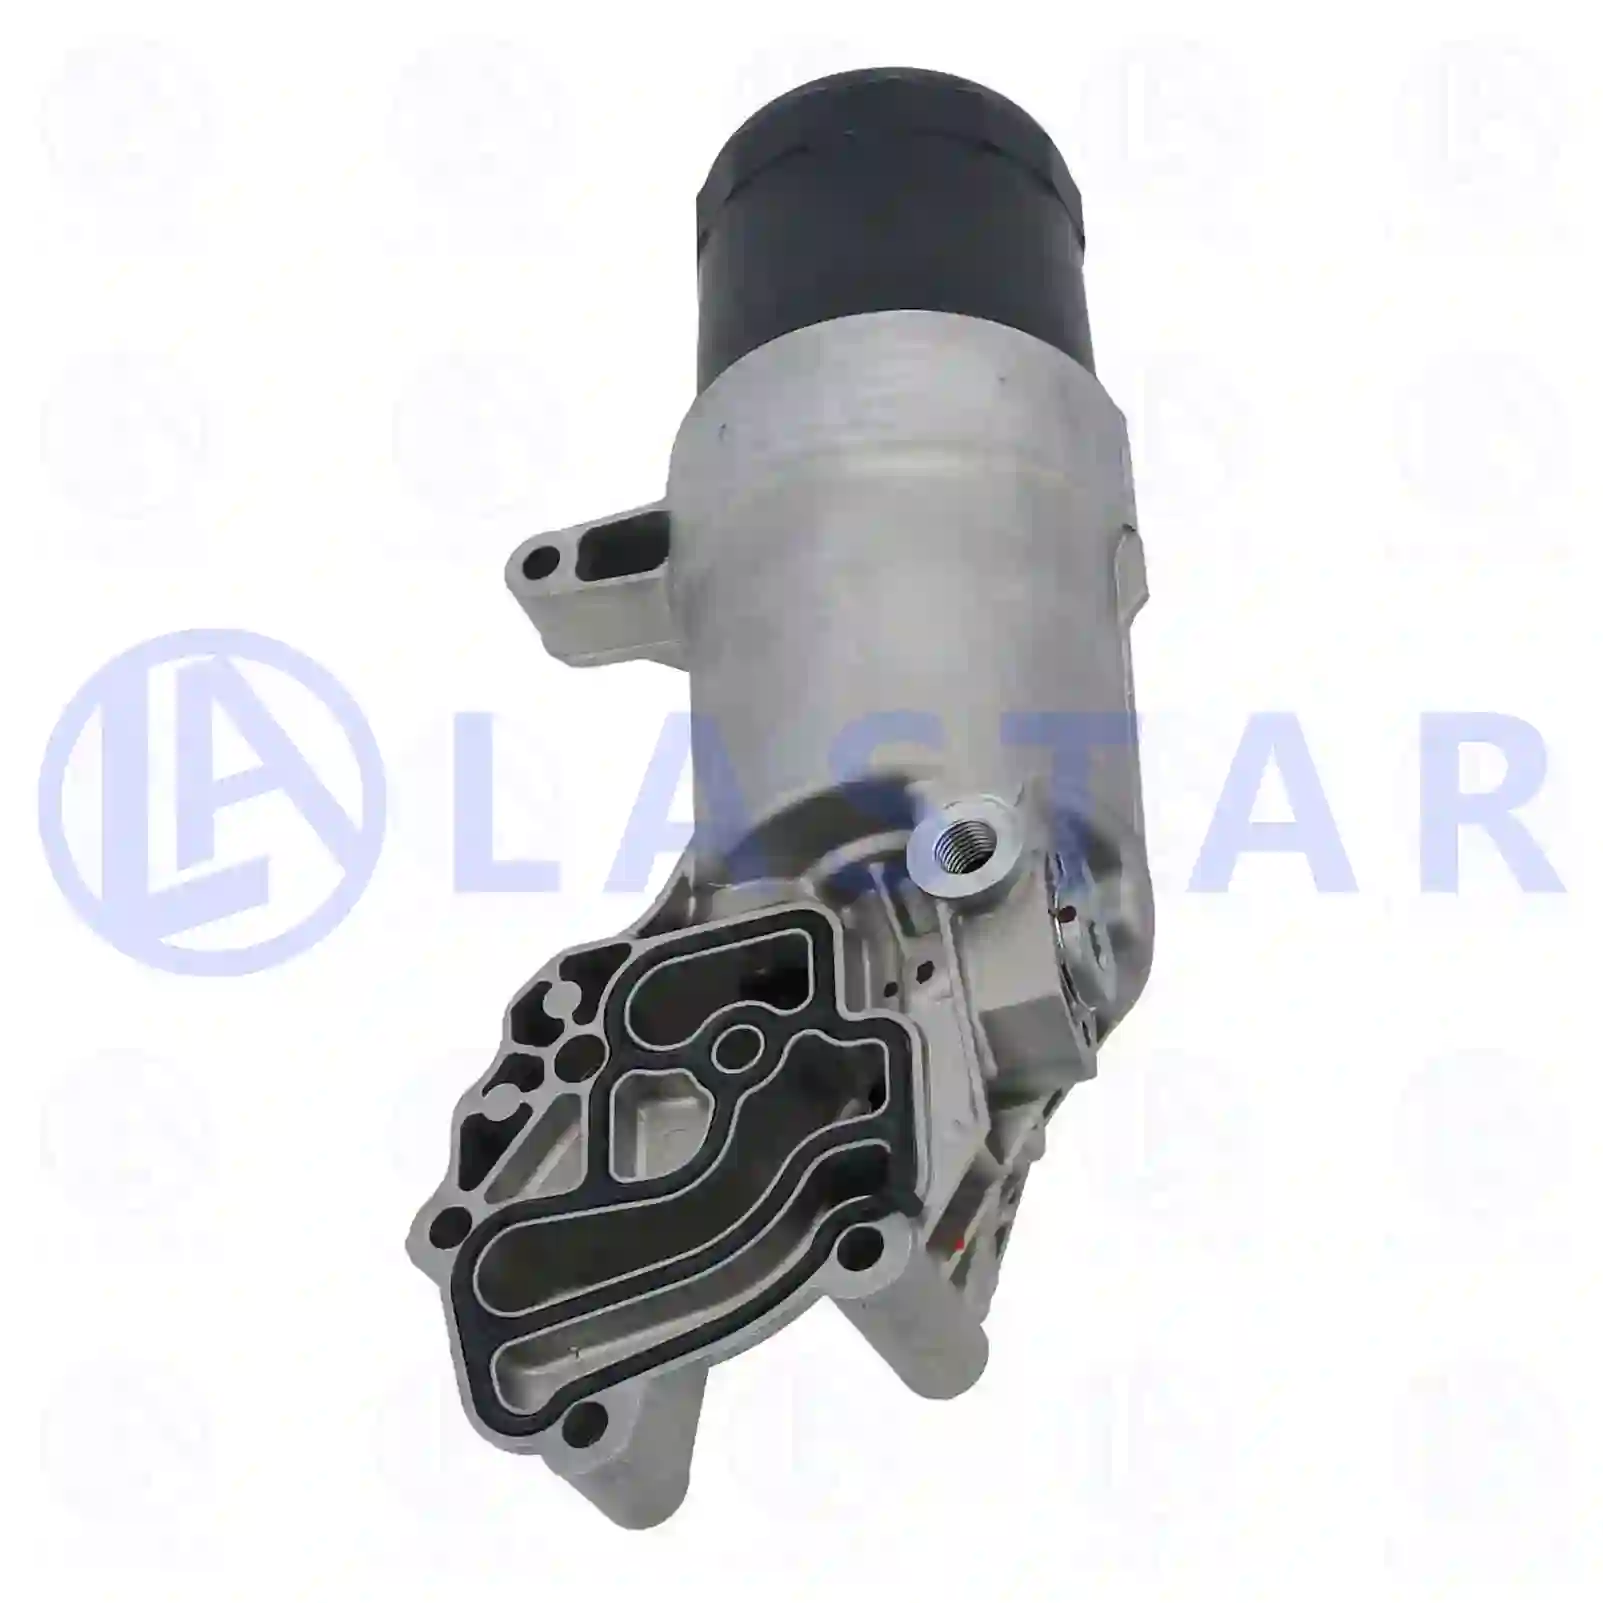 Oil Filter Oil filter housing, complete, with filter, la no: 77702071 ,  oem no:9061801210, 9061801710, ZG01729-0008 Lastar Spare Part | Truck Spare Parts, Auotomotive Spare Parts